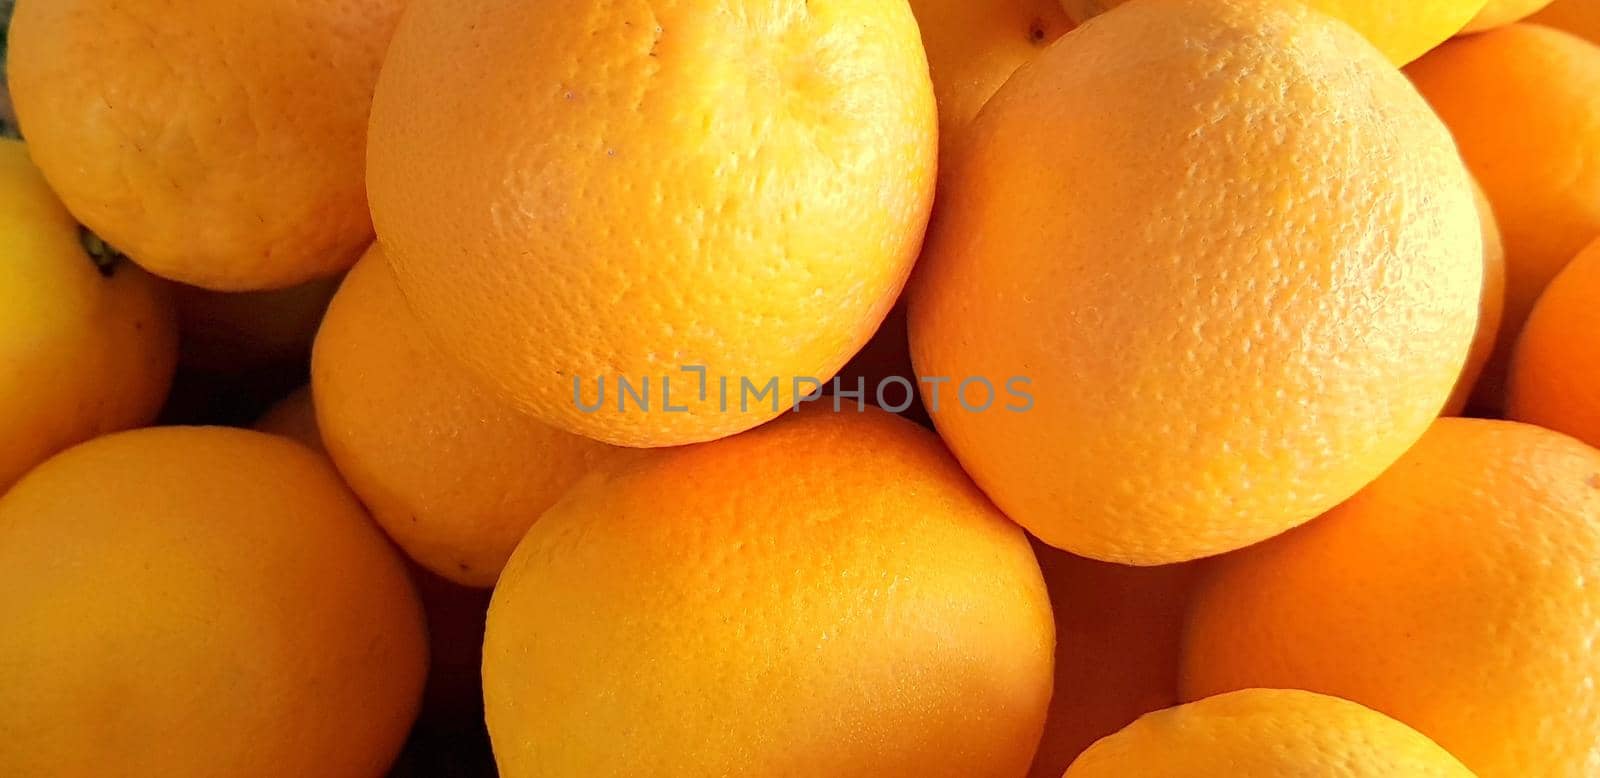 group of fresh orange fruits, tangerine good as background top view by antoksena